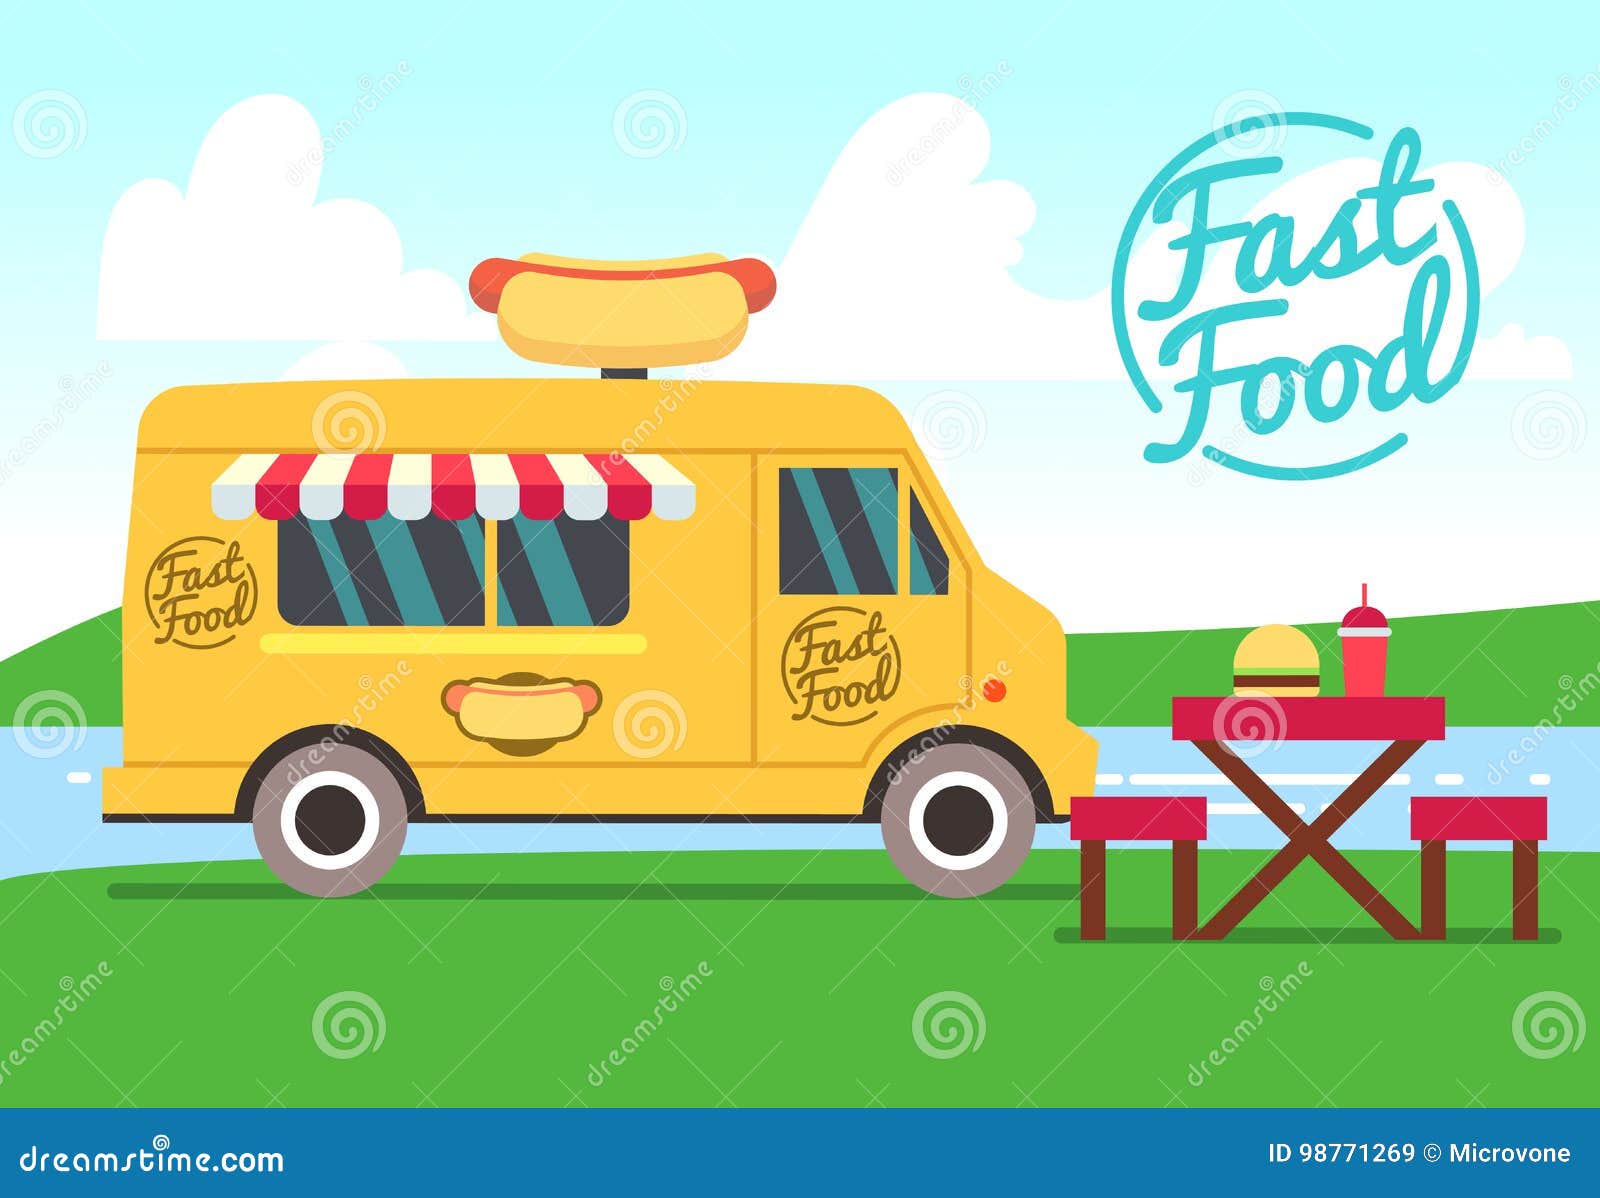 Outdoor Cafe With Food Truck And Tables Street Food Small